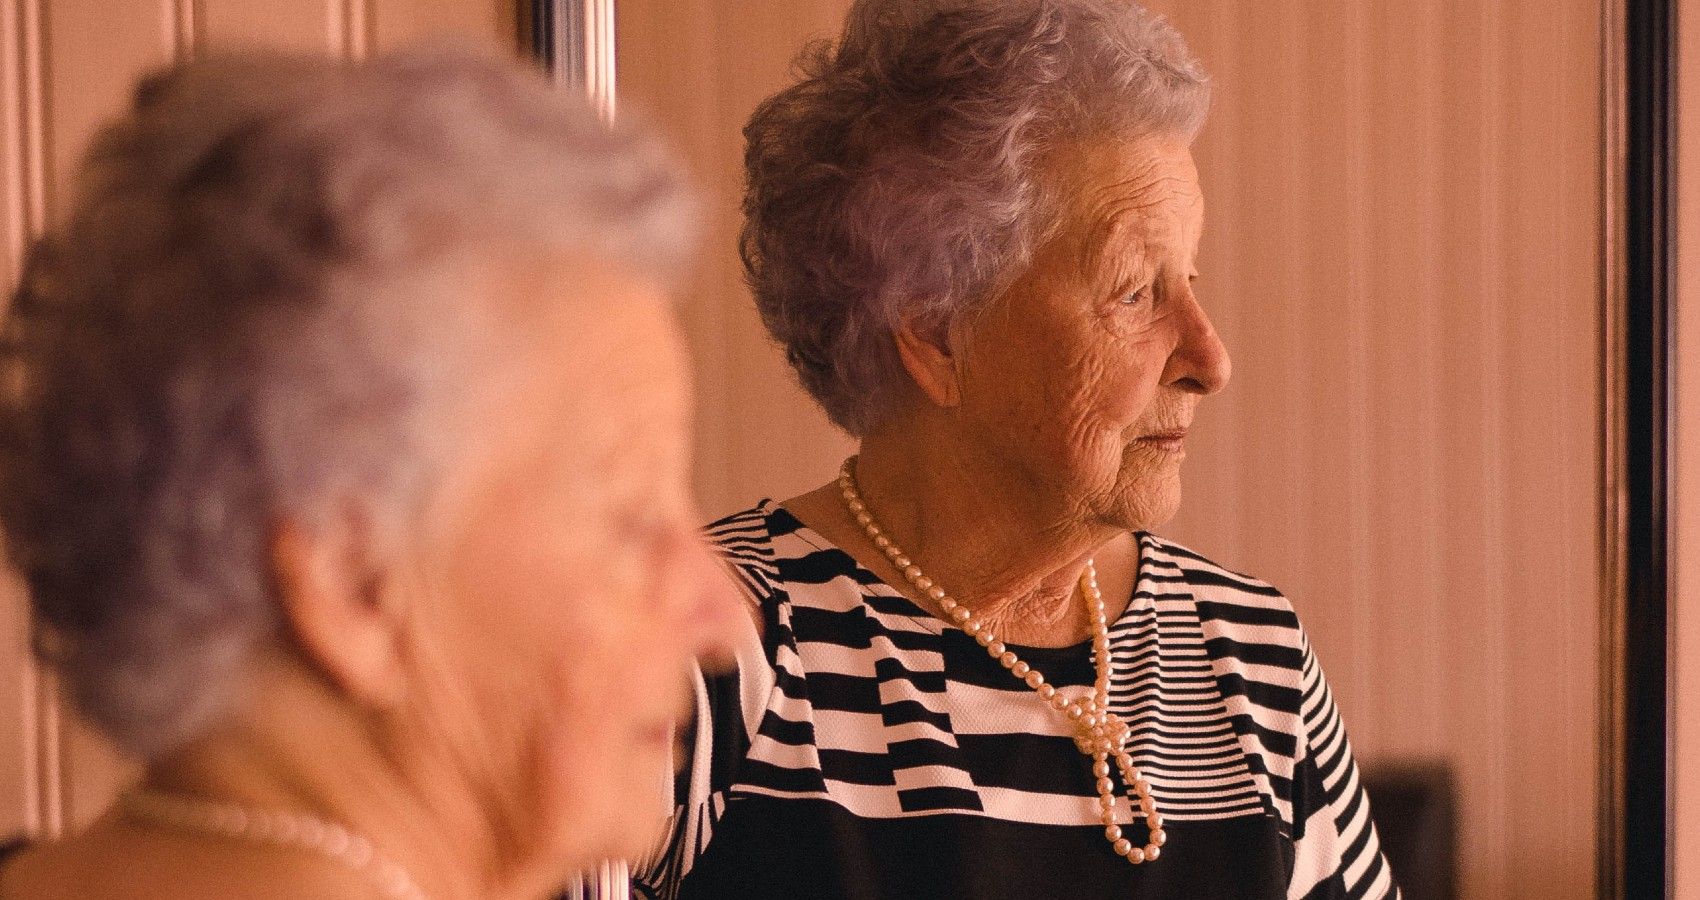 An Older Woman Looking In A Mirror And Looks Sad